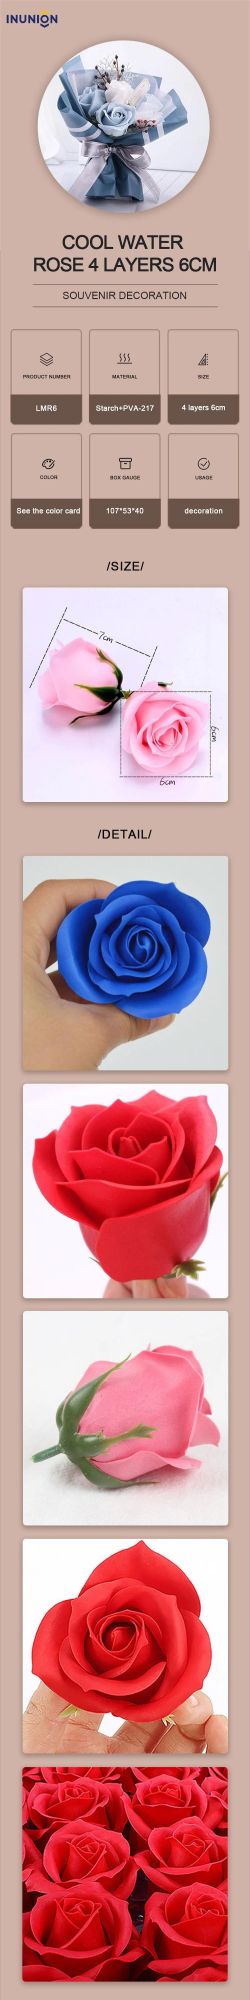 New Arrive 2021 Hot Selling Cold Beauty Roses Forever Roses Flower Boxes Best Gift Valentines Gifts